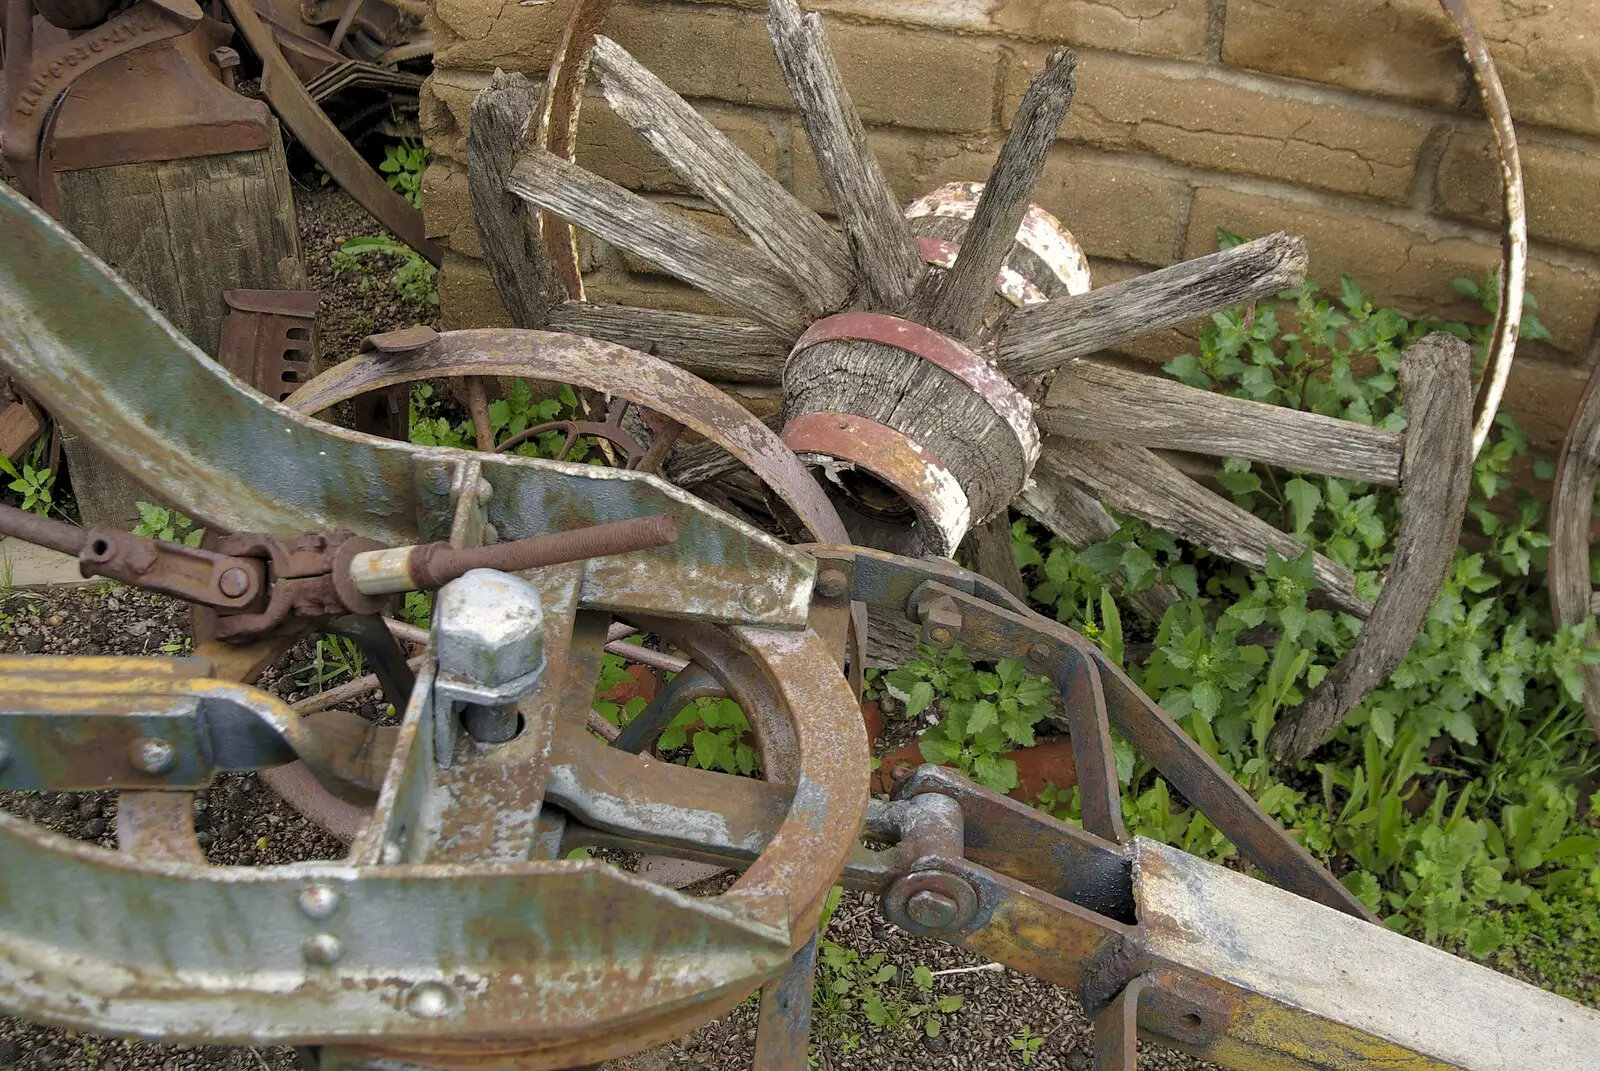 A broken cart wheel, from San Diego 8: The Beaches of Torrey Pines, and Ramona, California, USA - 29th February 2008